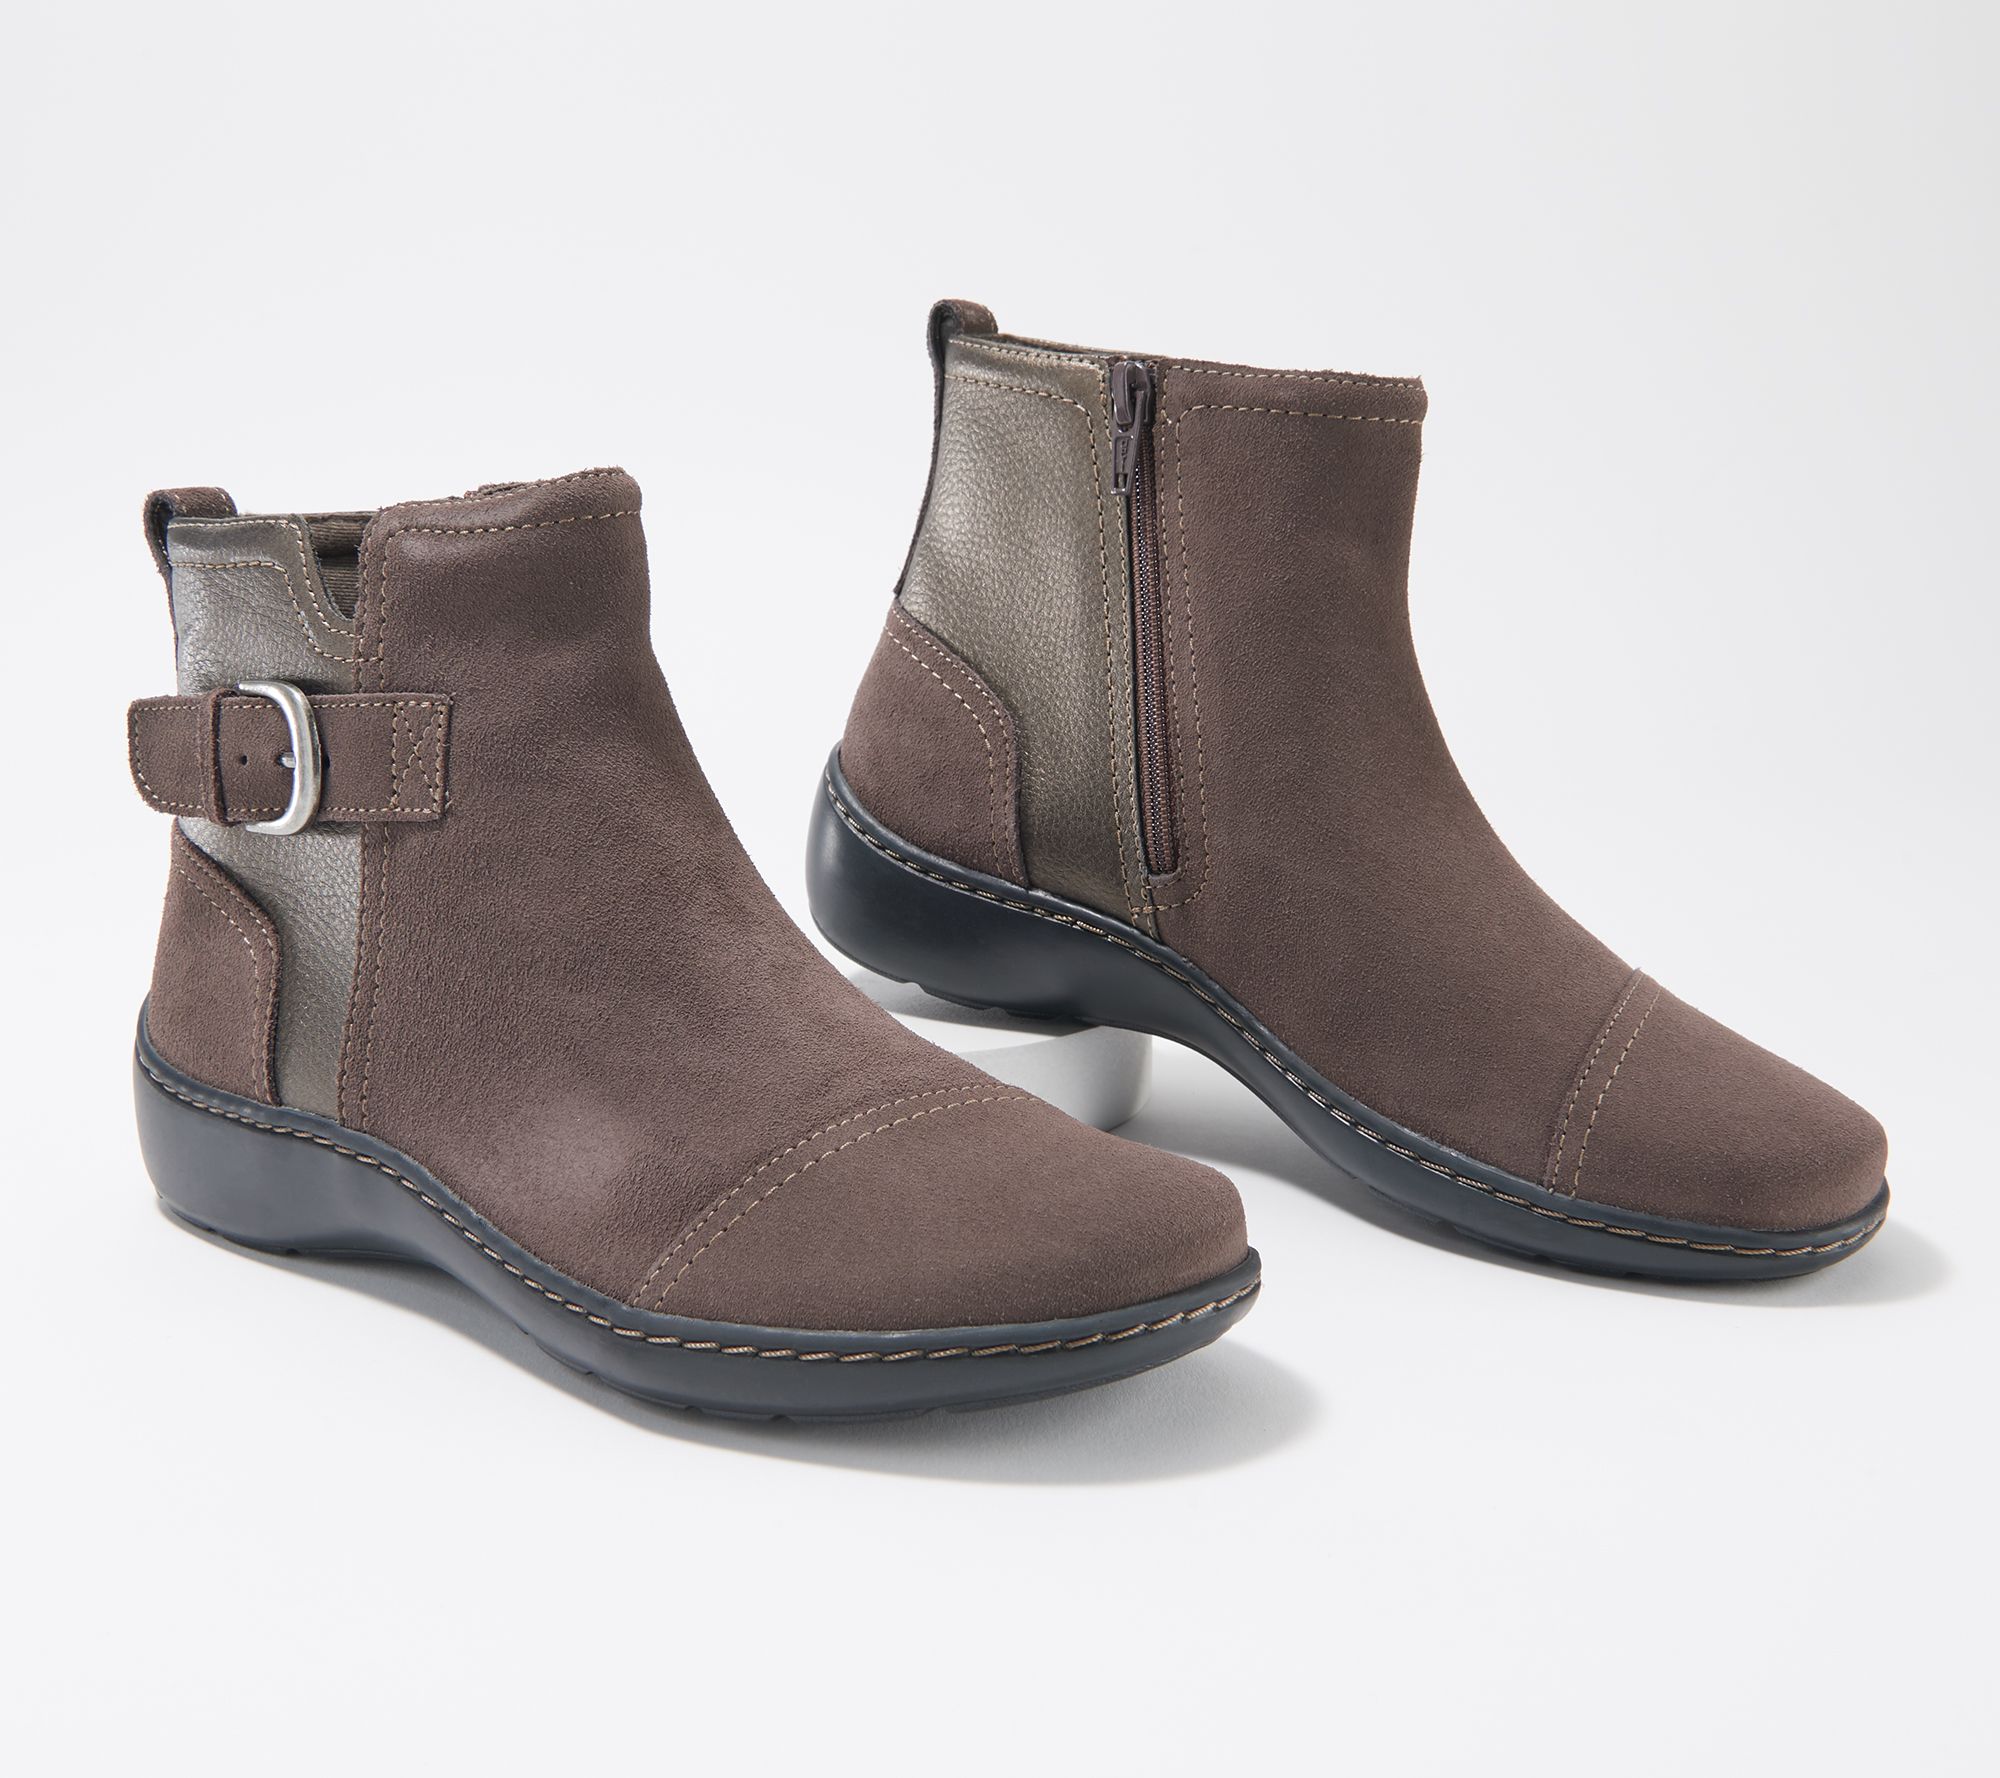 Clarks Suede Ankle Boots - Cora Marigold - QVC.com